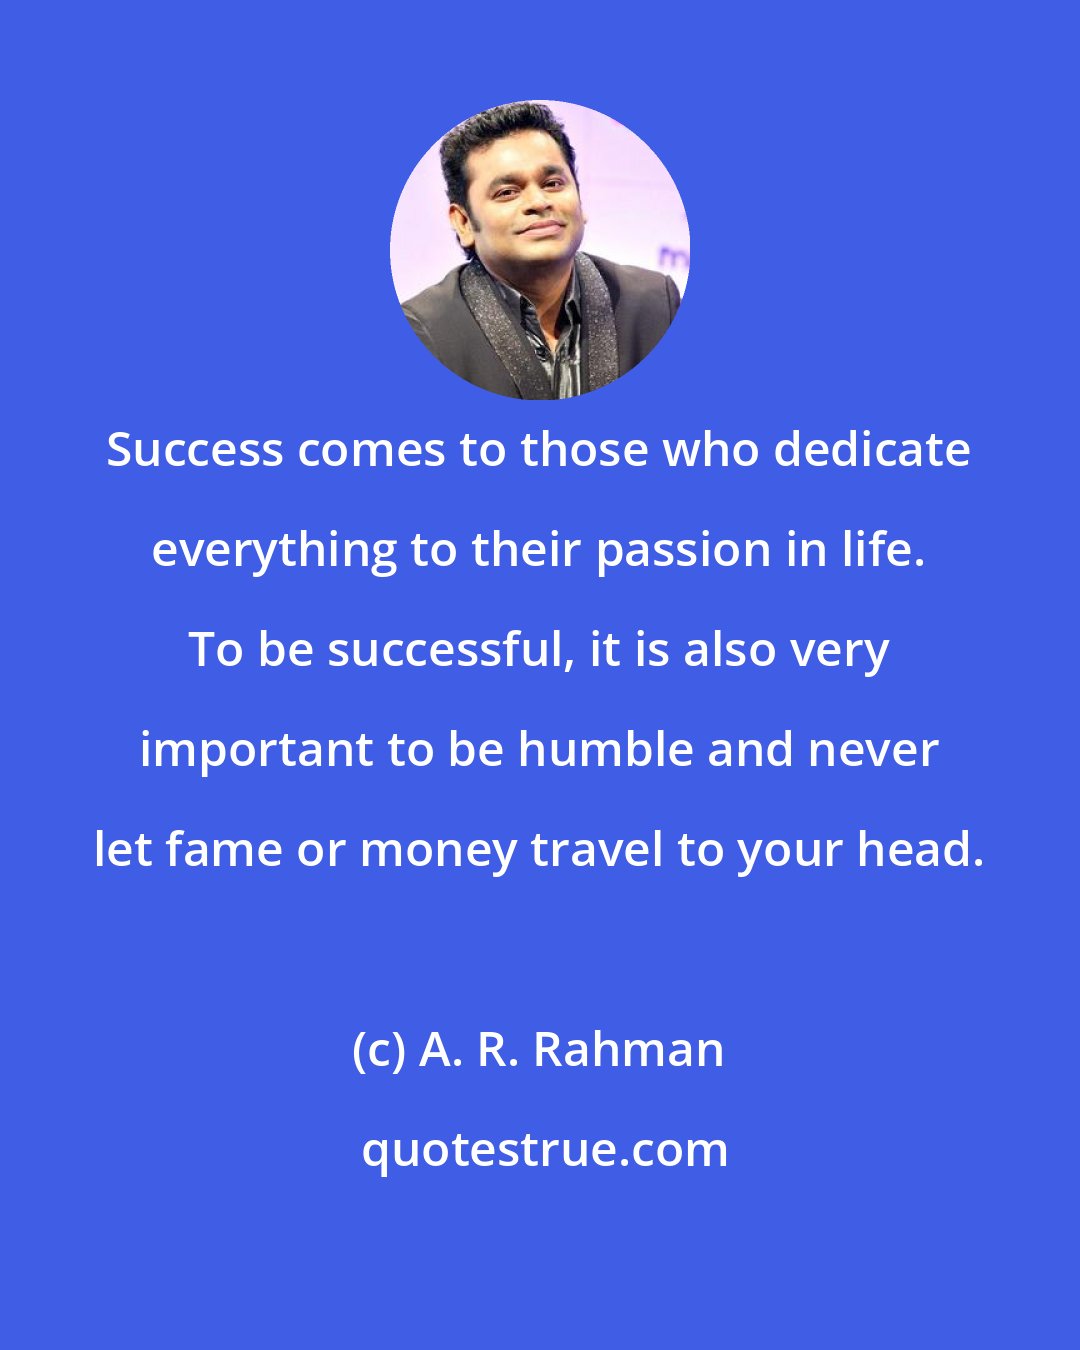 A. R. Rahman: Success comes to those who dedicate everything to their passion in life. To be successful, it is also very important to be humble and never let fame or money travel to your head.